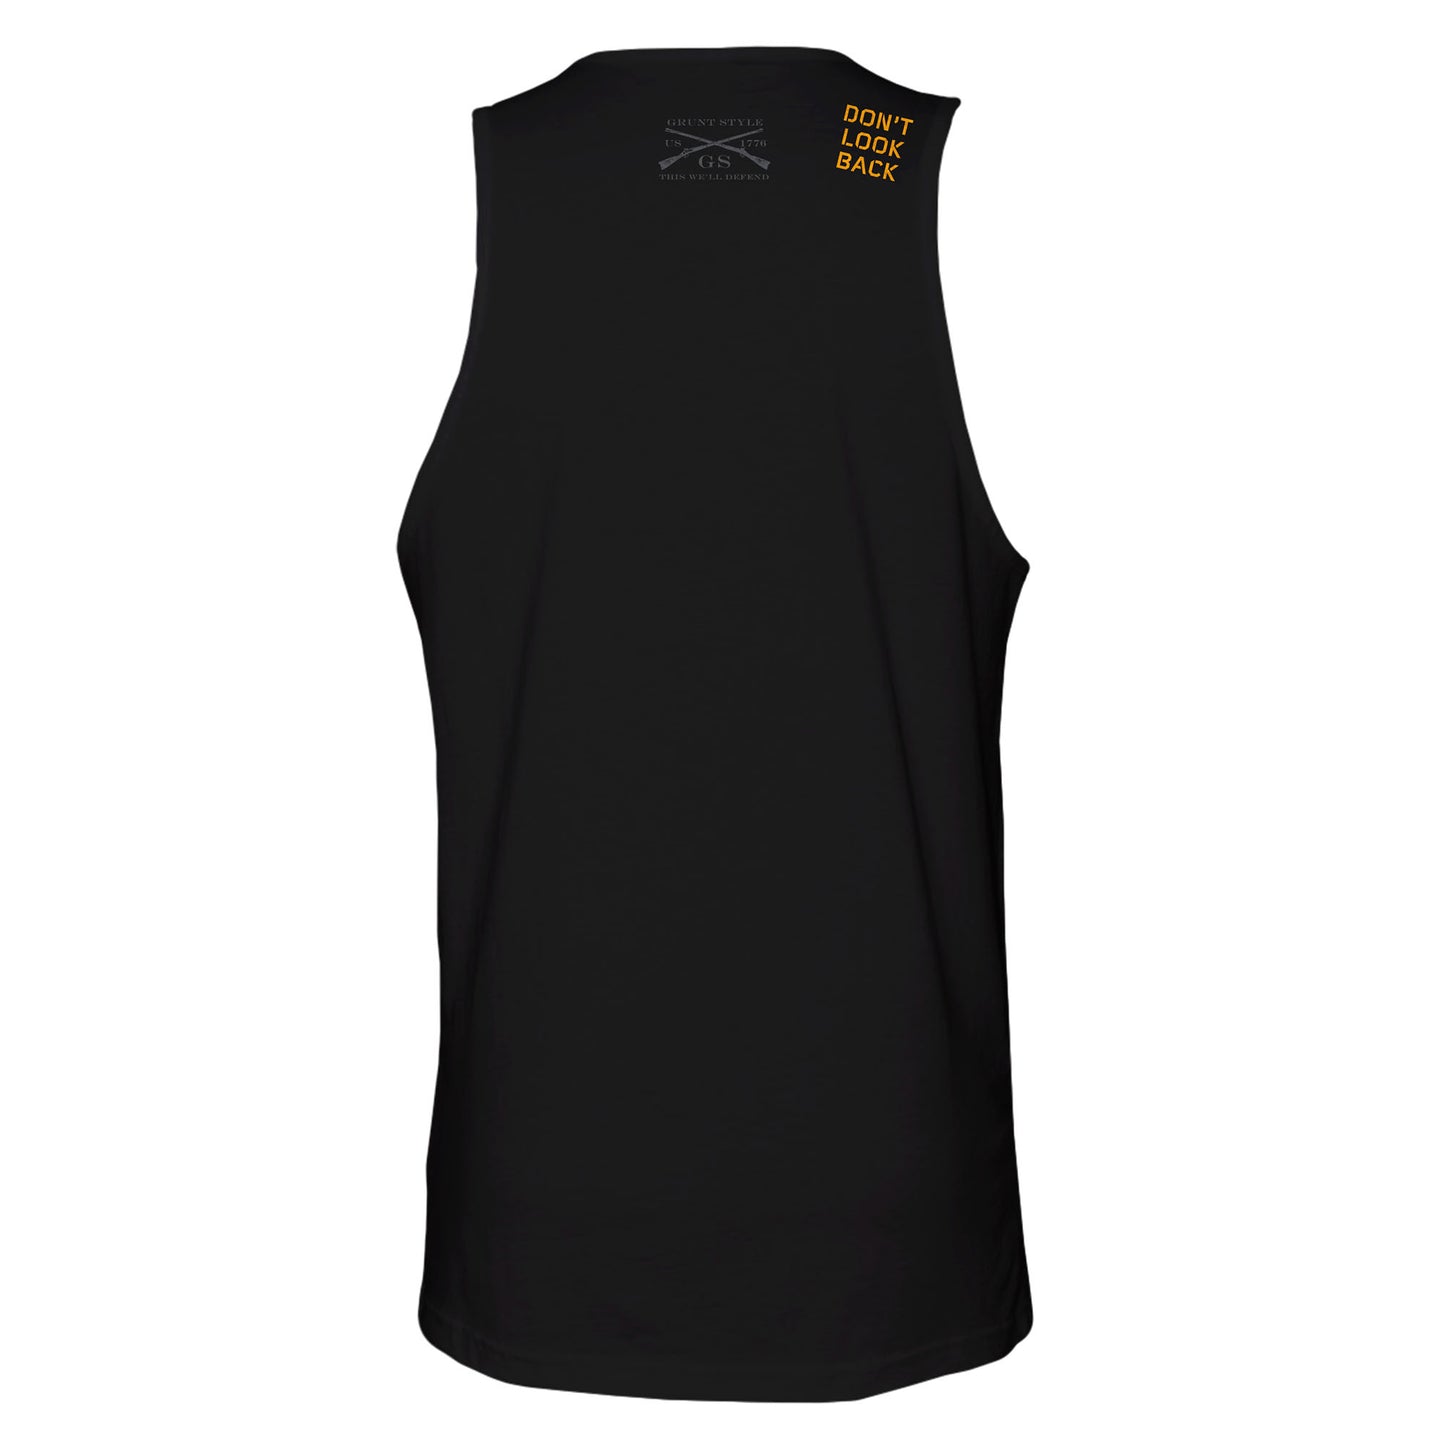 Gym Tank Tops for Men - Don't Look Back 